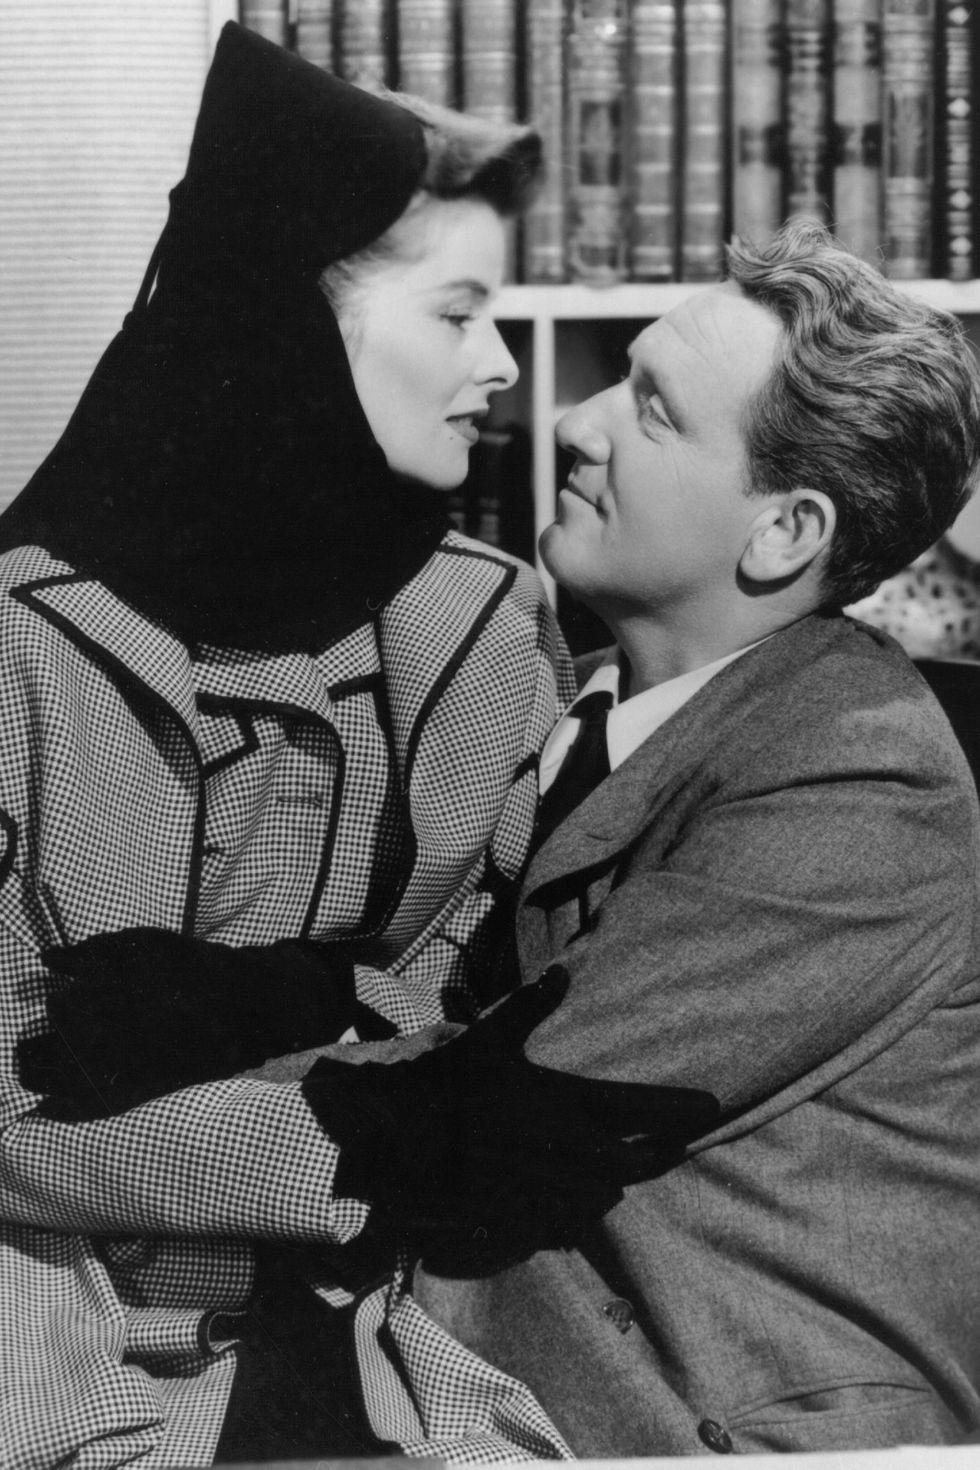 1942:  Katharine Hepburn (1907 - 2003) and Spencer Tracy (1900 -1967) embrace in a scene from the film 'Woman Of The Year', directed by George Stevens for MGM. The film describes the marriage of a sports columnist and a lady politician who have nothing in common save for their love for each other.  (Photo by Hulton Archive/Getty Images)